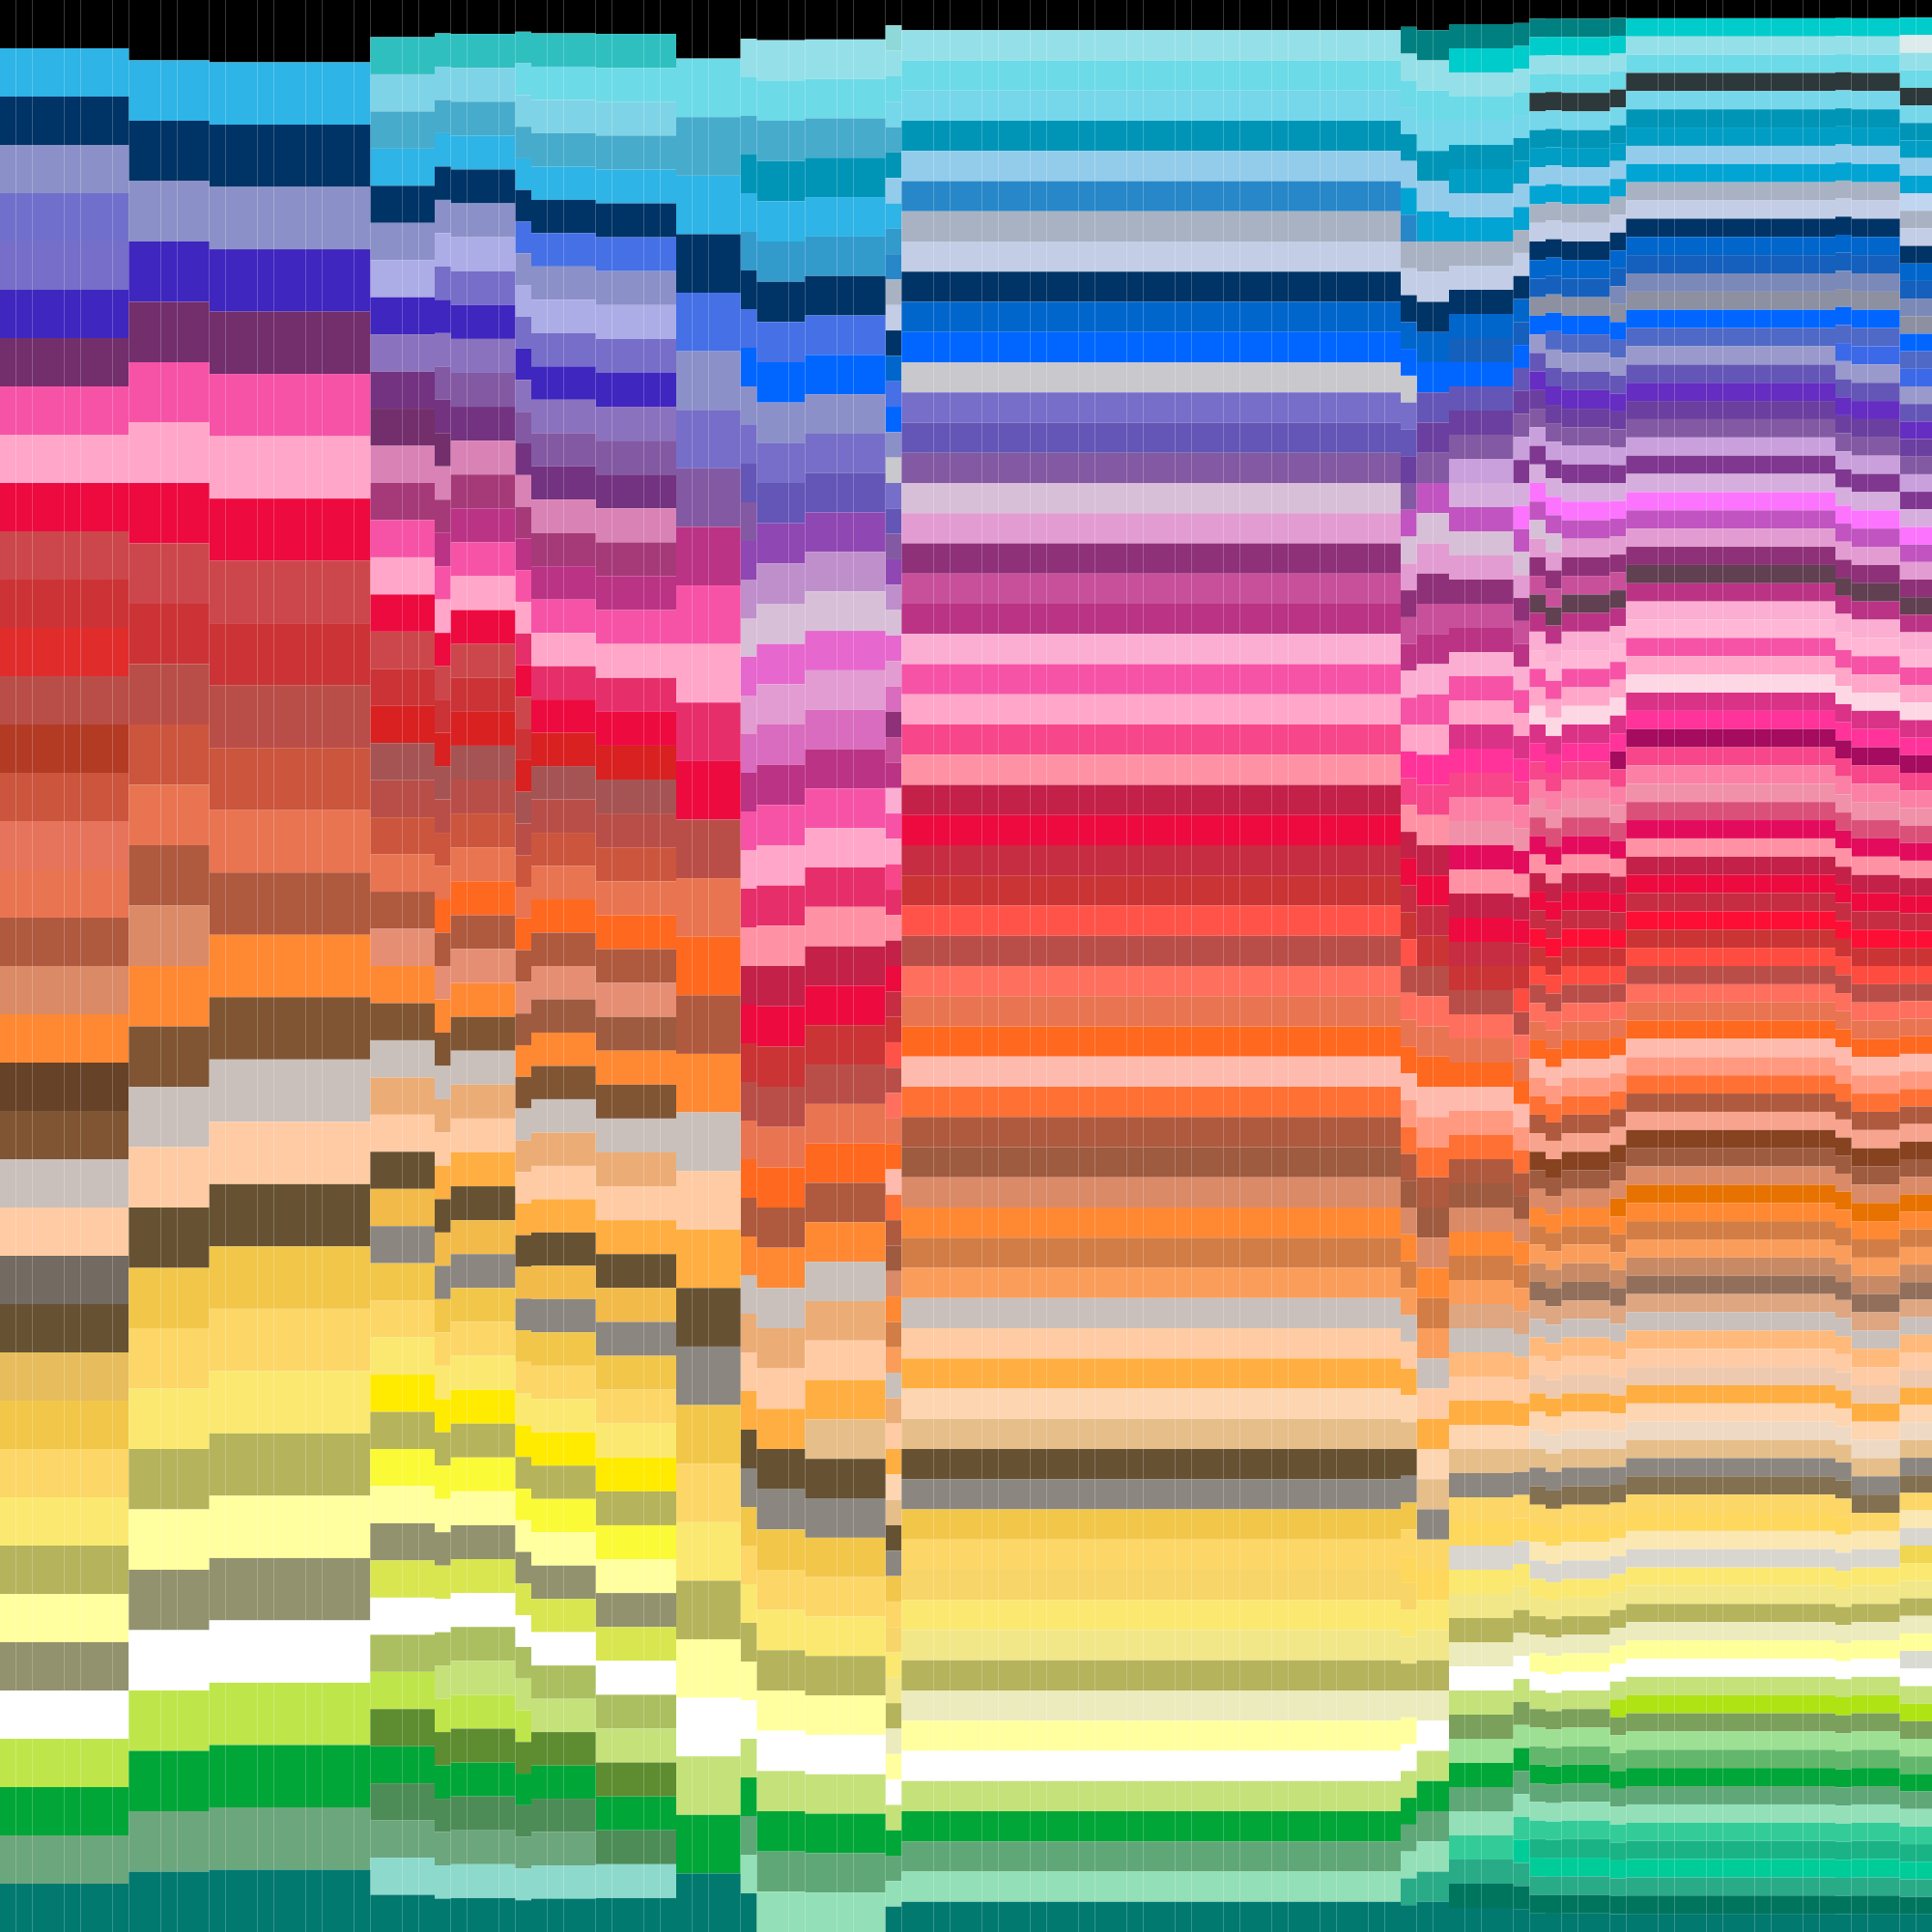 Grids of coloured blocks in a vaguely rainbow-like ordering